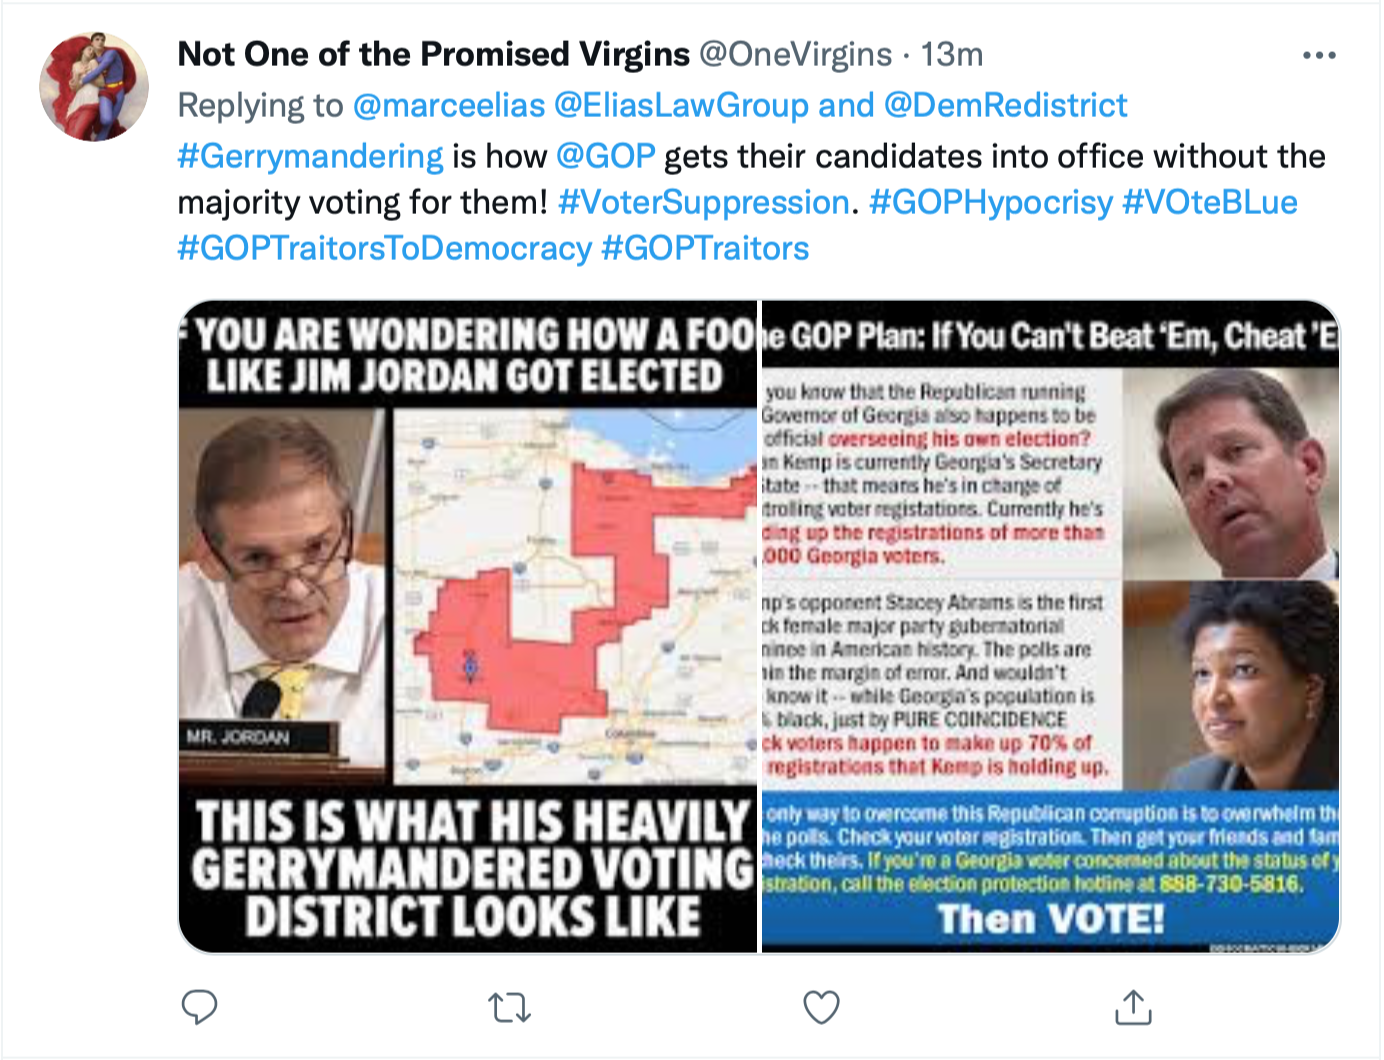 Screen-Shot-2021-10-18-at-4.31.57-PM Republicans Hit With Legal Move To Stop Blatant GOP Voter Suppression Civil Rights Featured Gerrymandering Politics Top Stories Twitter 